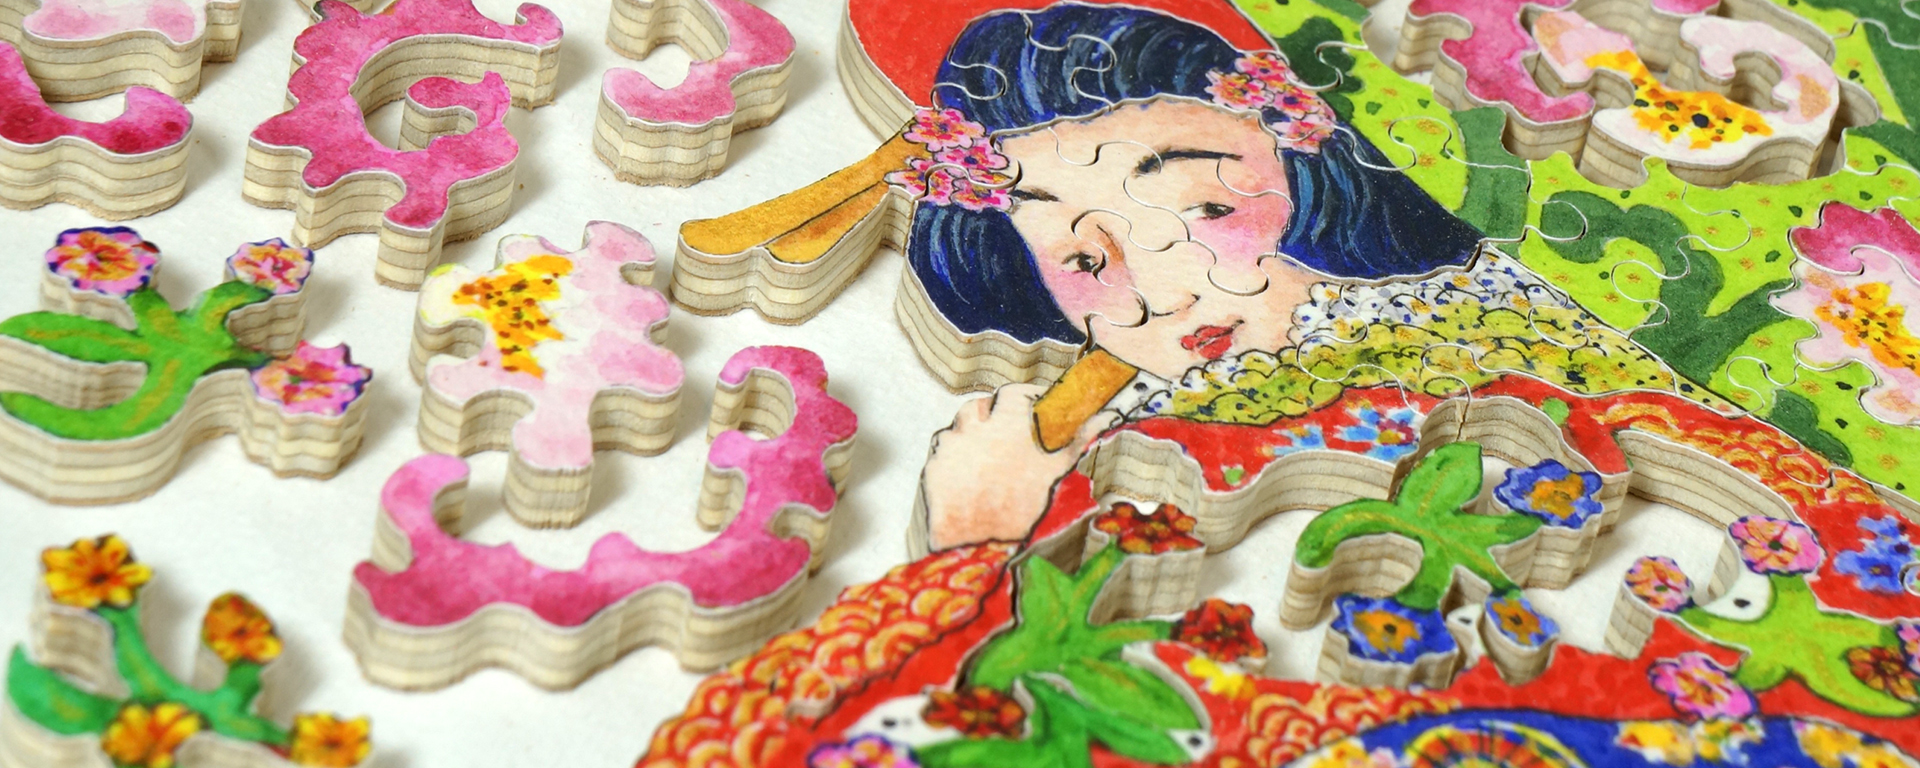 Wooden teaser puzzle of a woman wearing a colorful kimono holding an umbrella with cherry blossoms on the top.